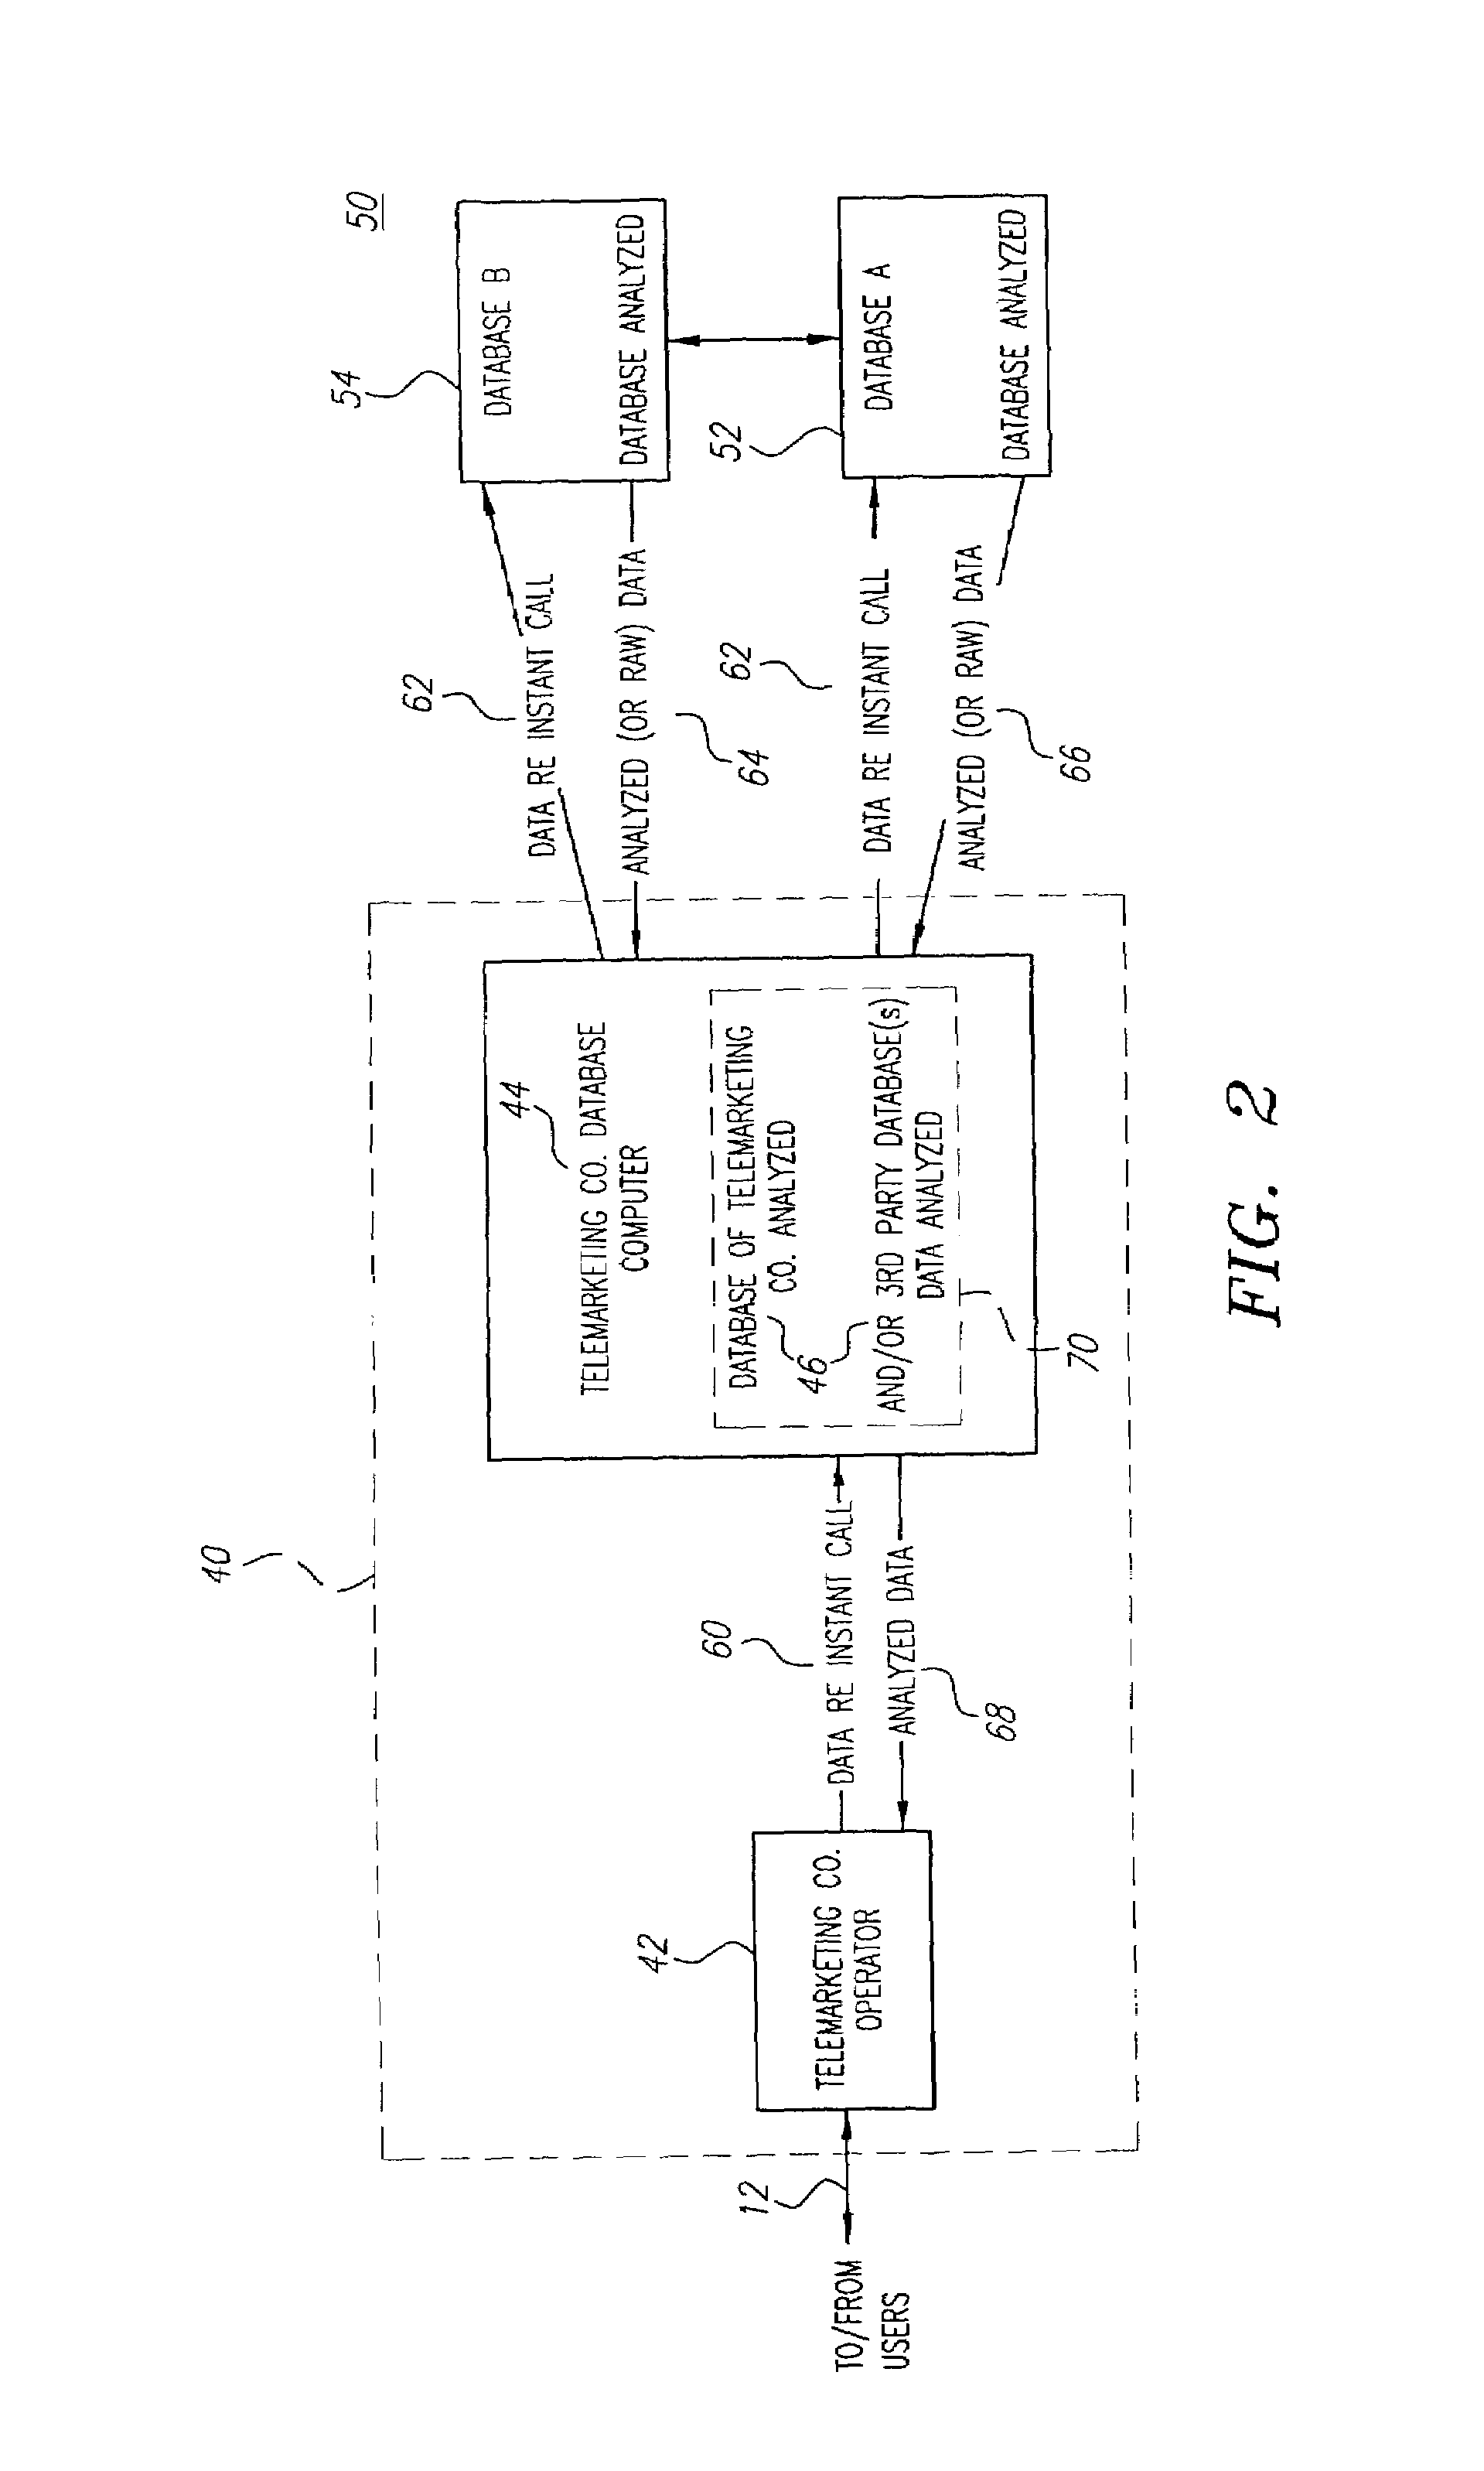 Methods and apparatus for intelligent selection of goods and services in telephonic and electronic commerce